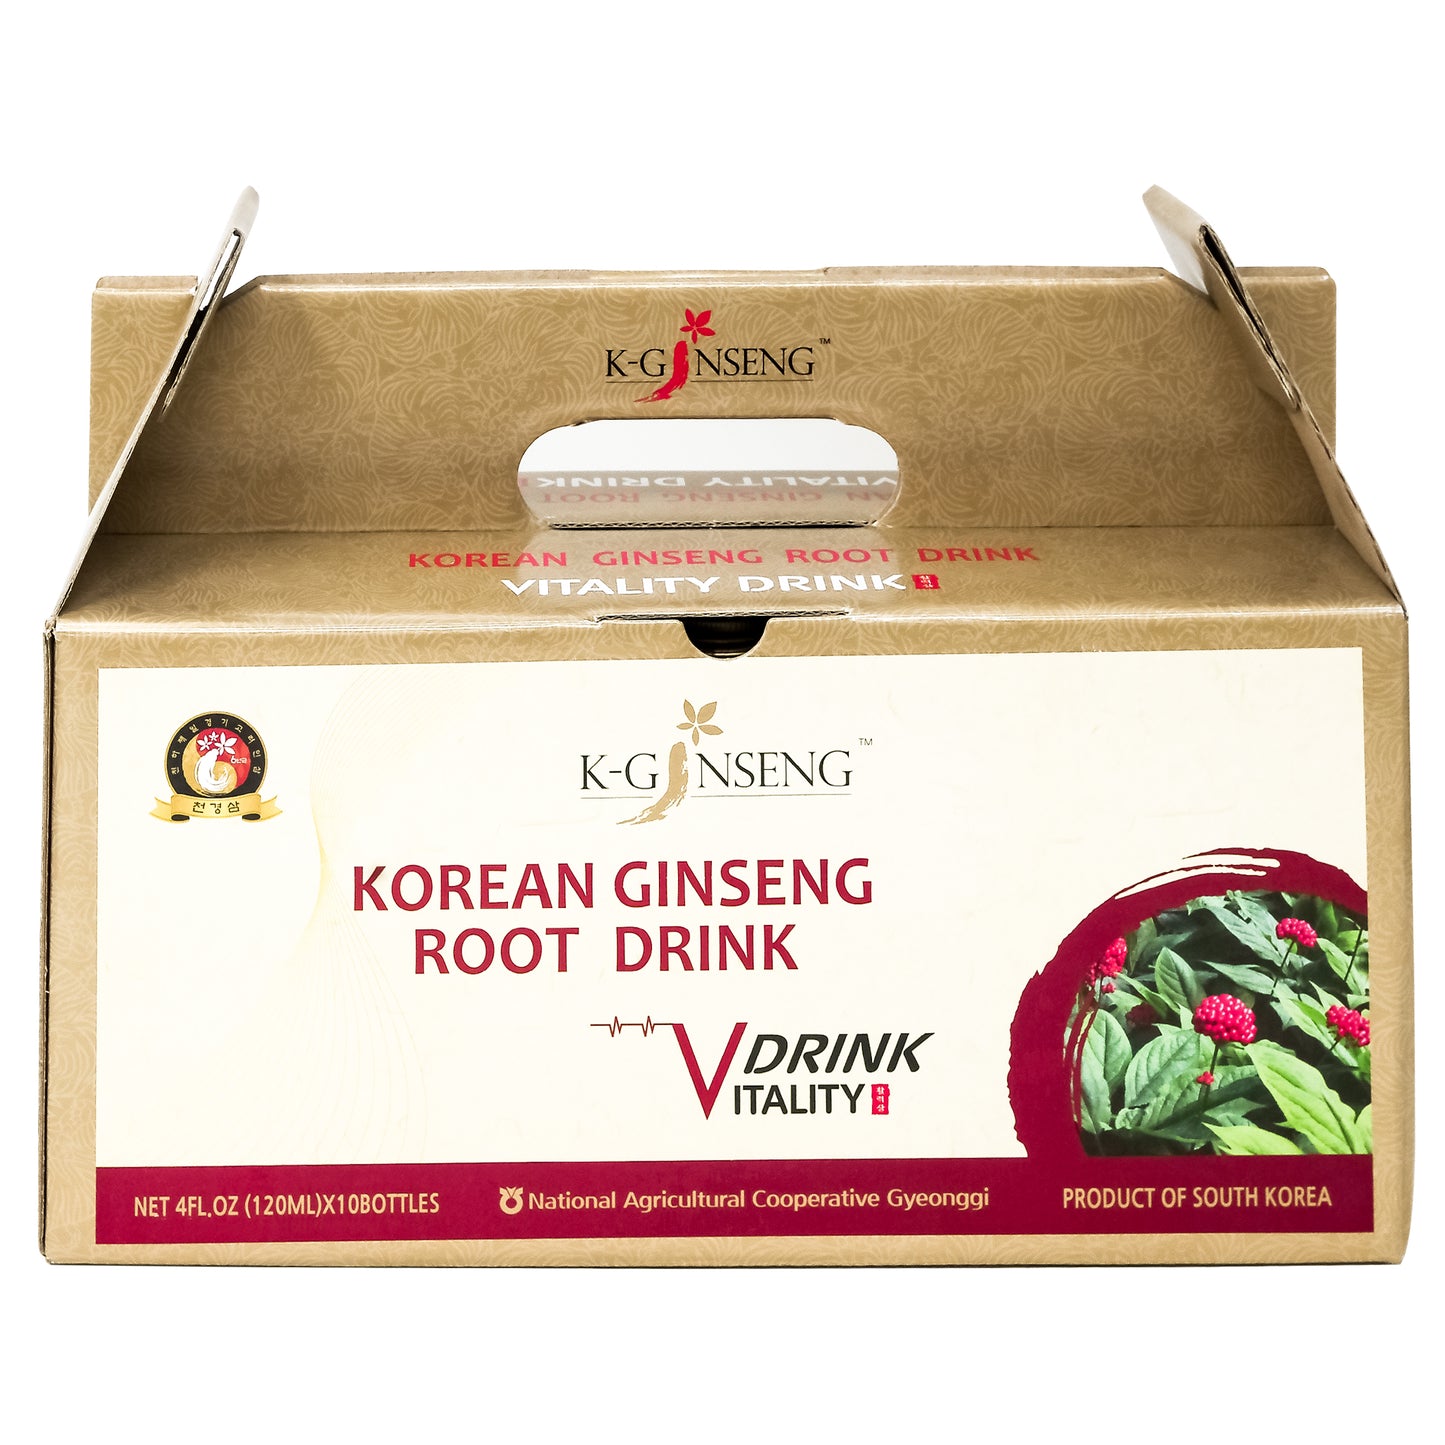 KOREAN GINSENG ROOT DRINK GOLD 1box- 10 bottle / 1 bottle - 4FL OZ/Vitality Drink/Power Drink/Healthy drink / ginseng drink with chewing ginseng,